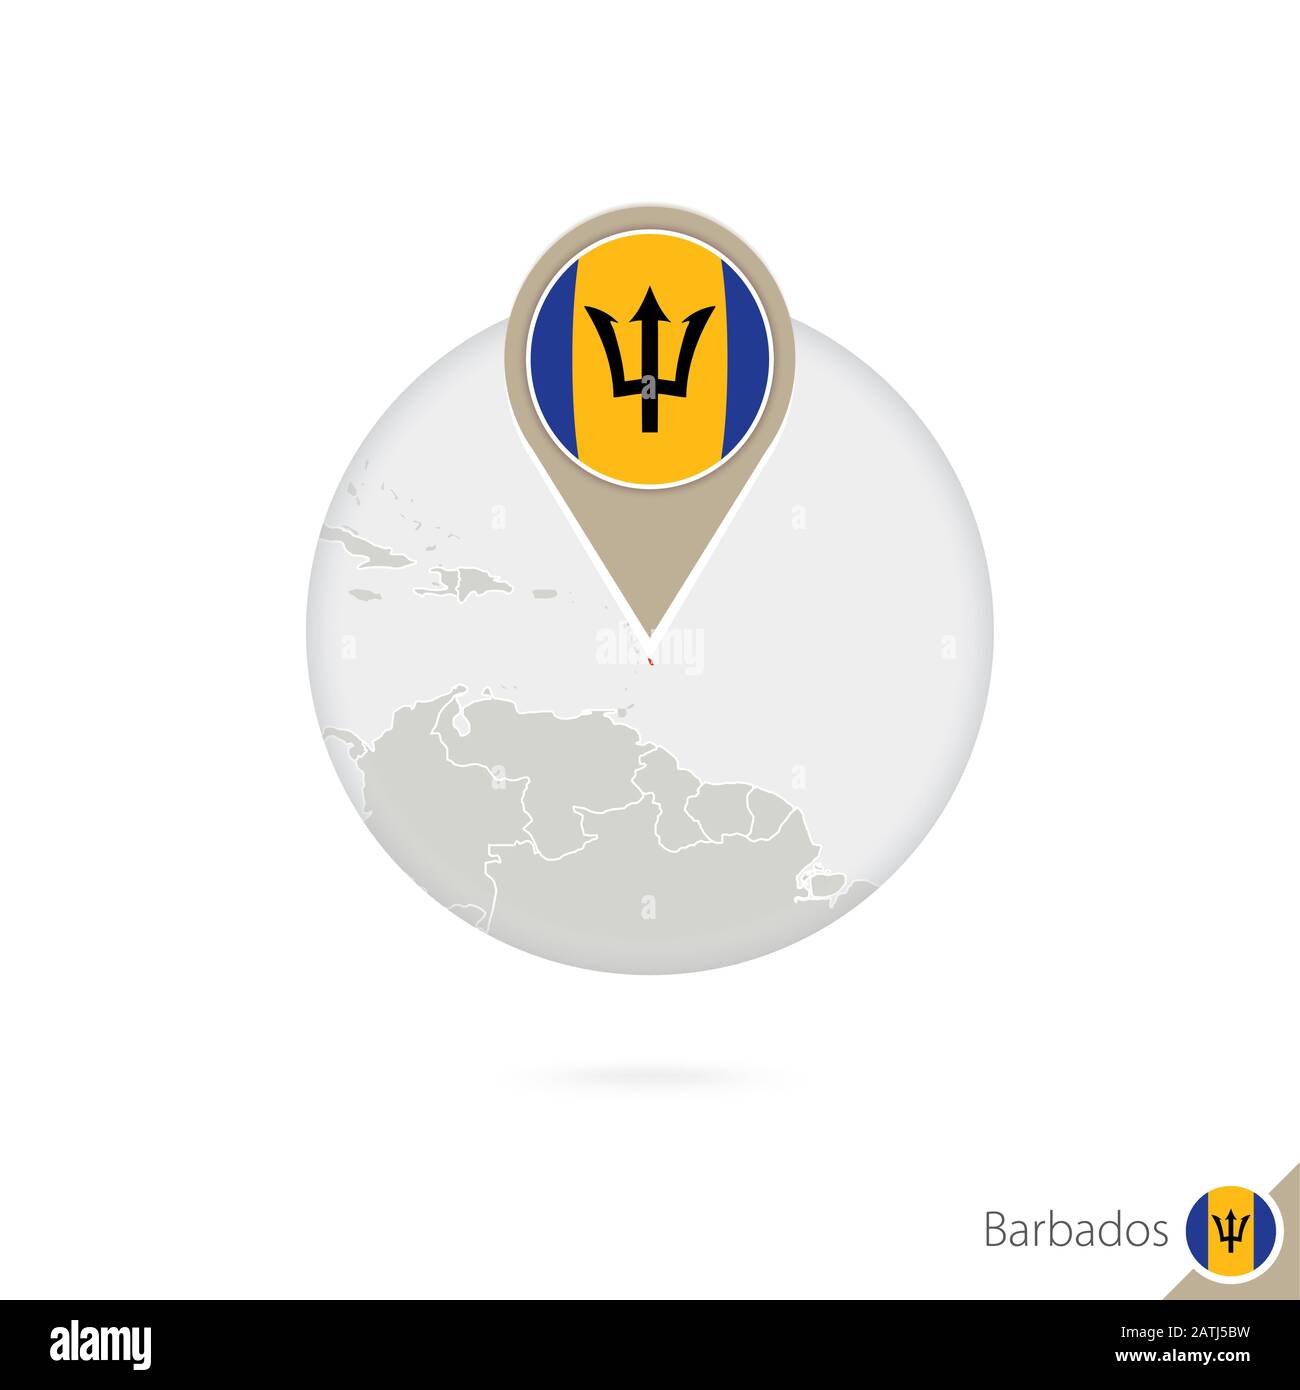 Barbados map and flag in circle. Map of Barbados, Barbados flag pin. Map of Barbados in the style of the globe. Vector Illustration. Stock Vector